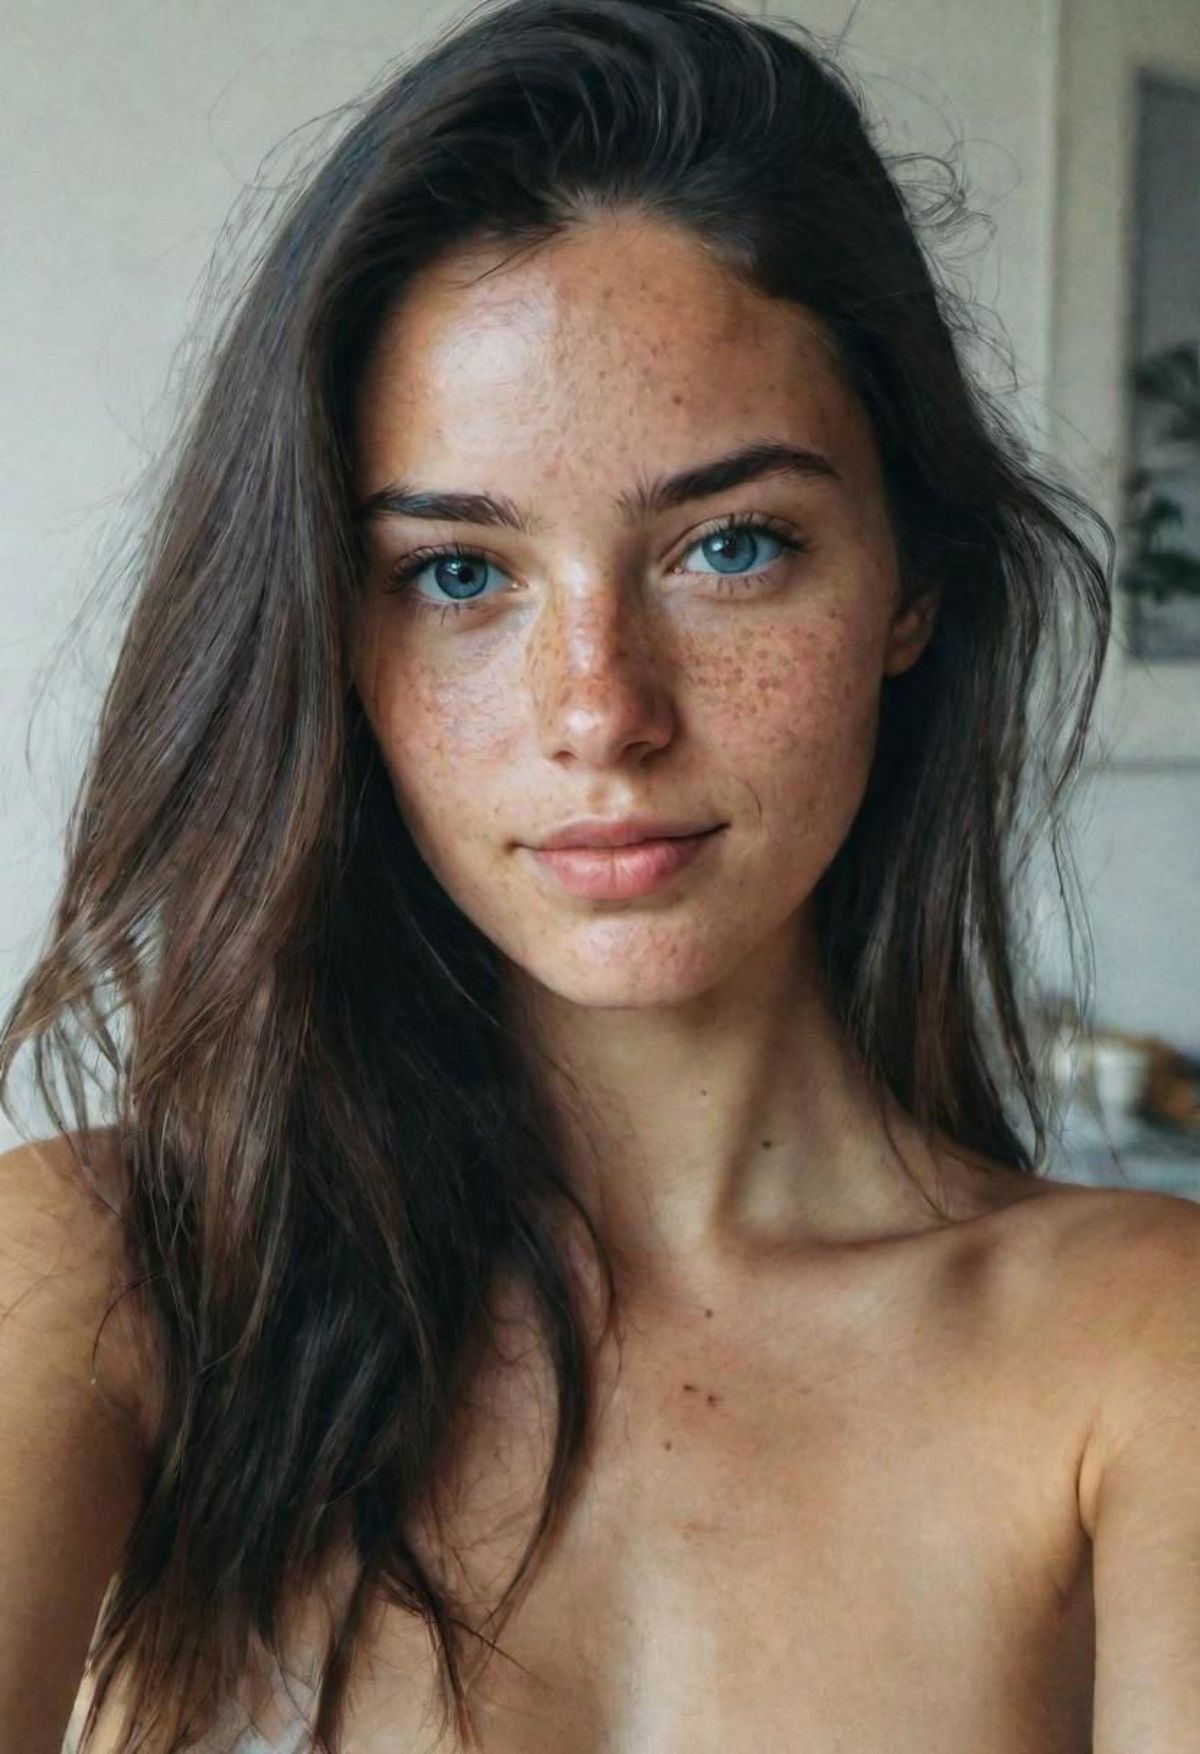 A woman with brown hair and freckles looking at the camera.